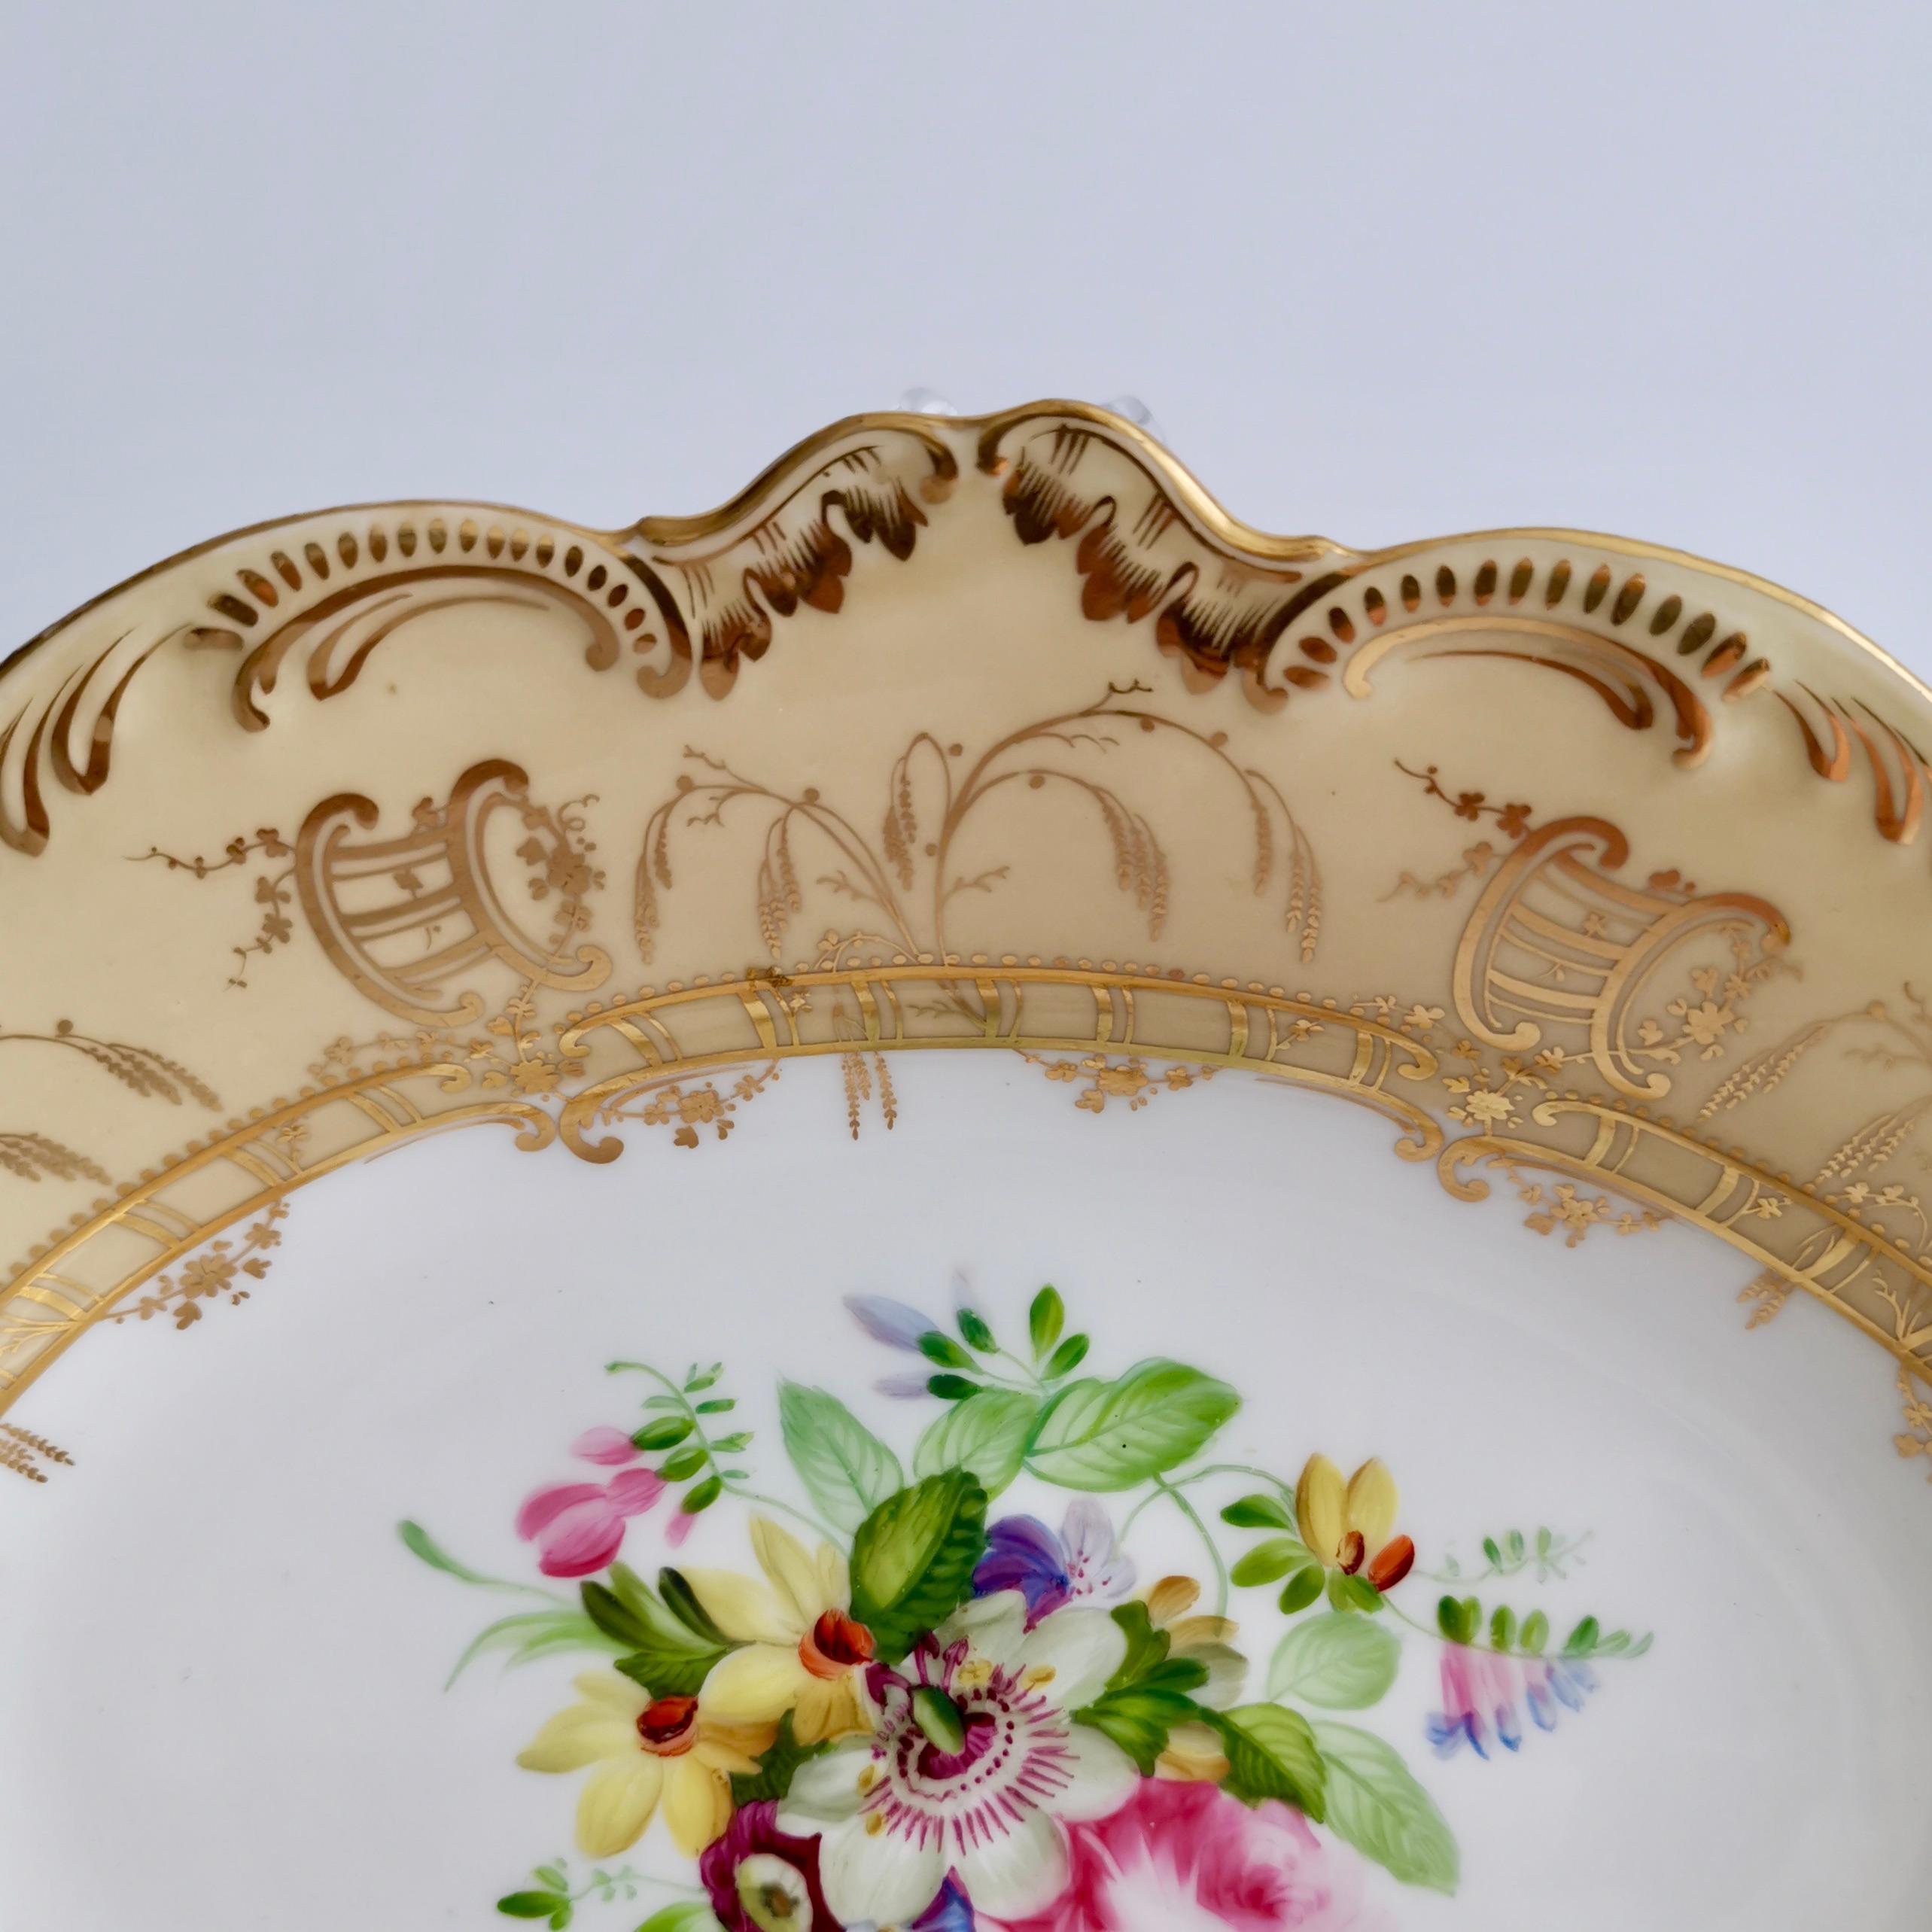 Porcelain Coalport Set of 2 Oval Dessert Dishes, Beige with Flowers by Thomas Dixon, 1847